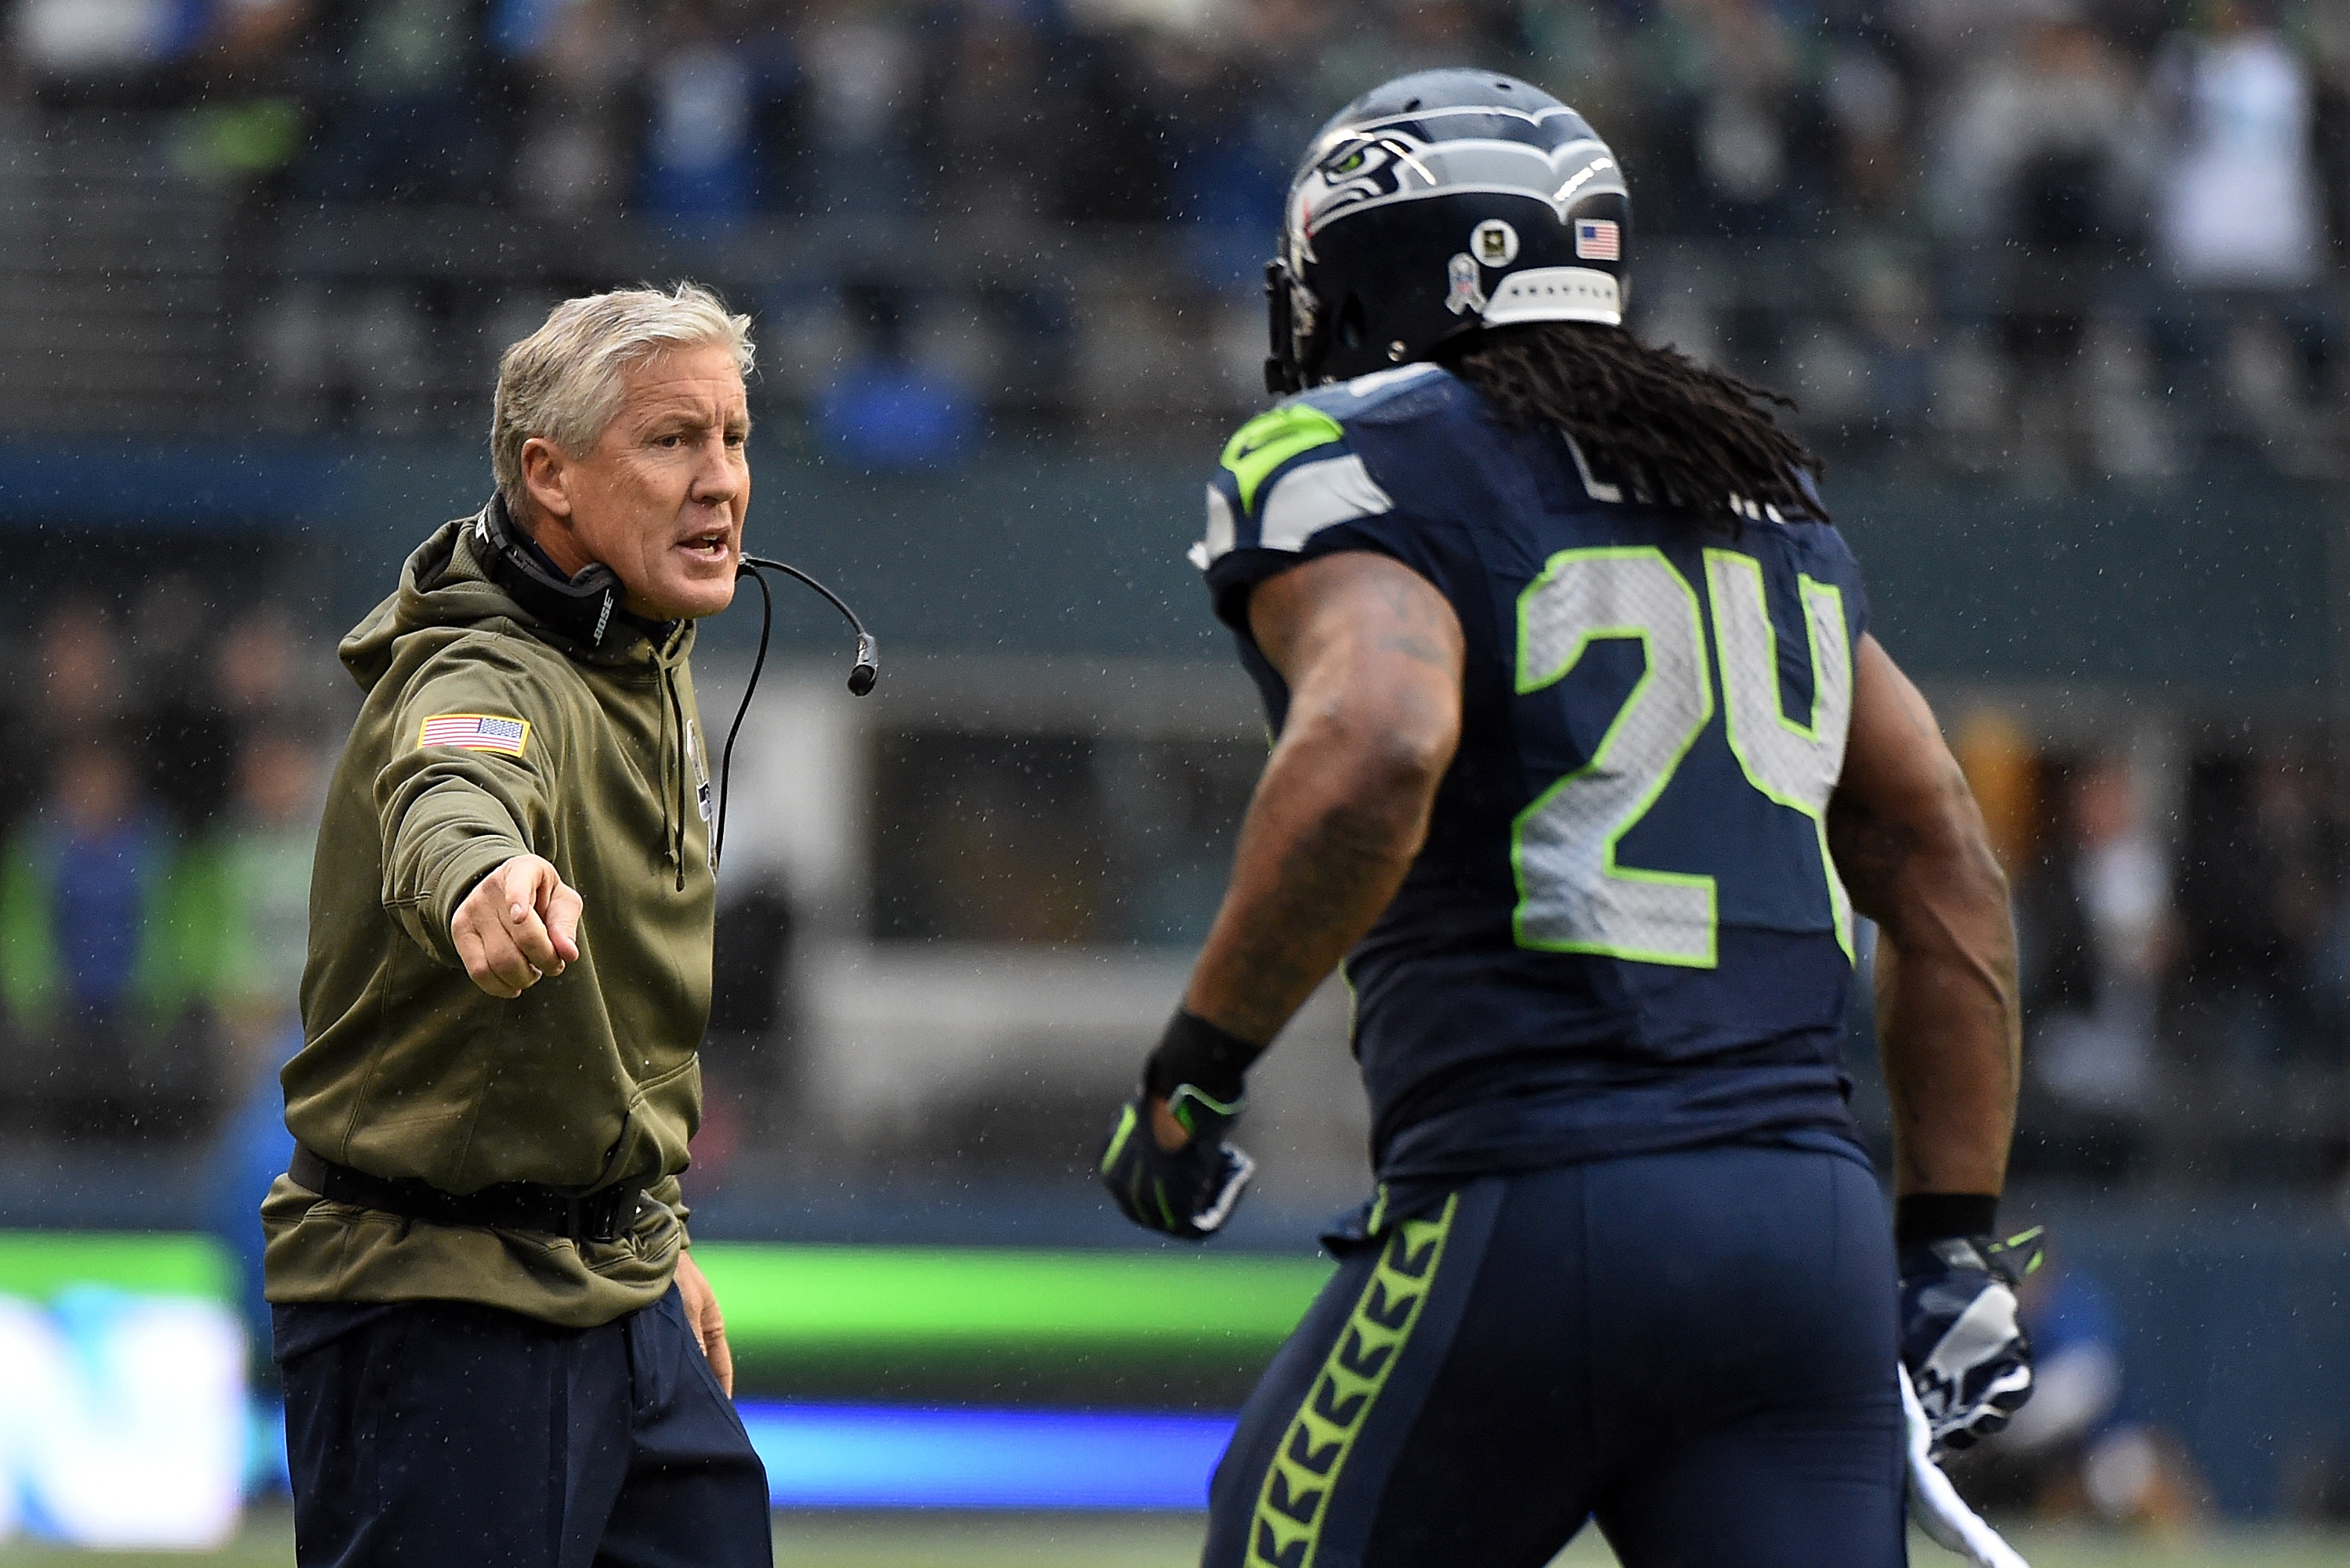 Could Marshawn Lynch return to the NFL? Pete Carroll says Lynch is  'somewhat entertaining' the idea